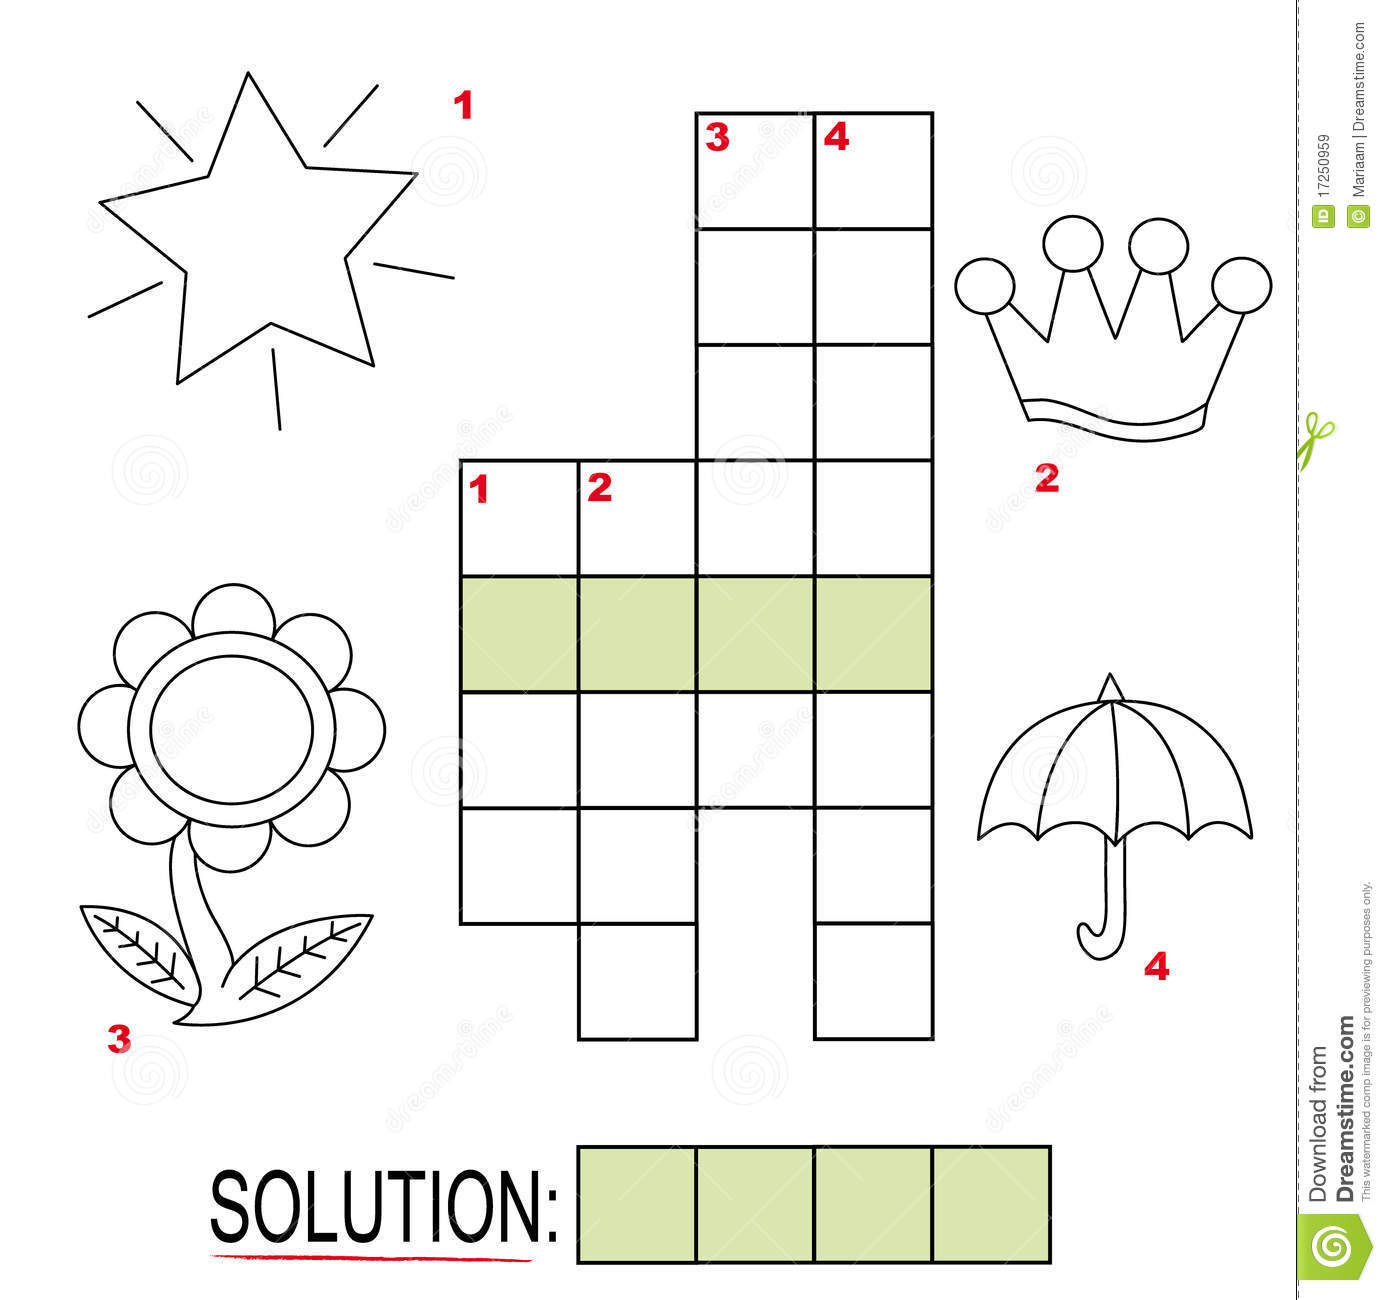 Crossword Puzzle For Kids Part 3 Royalty Free Stock Images   Image